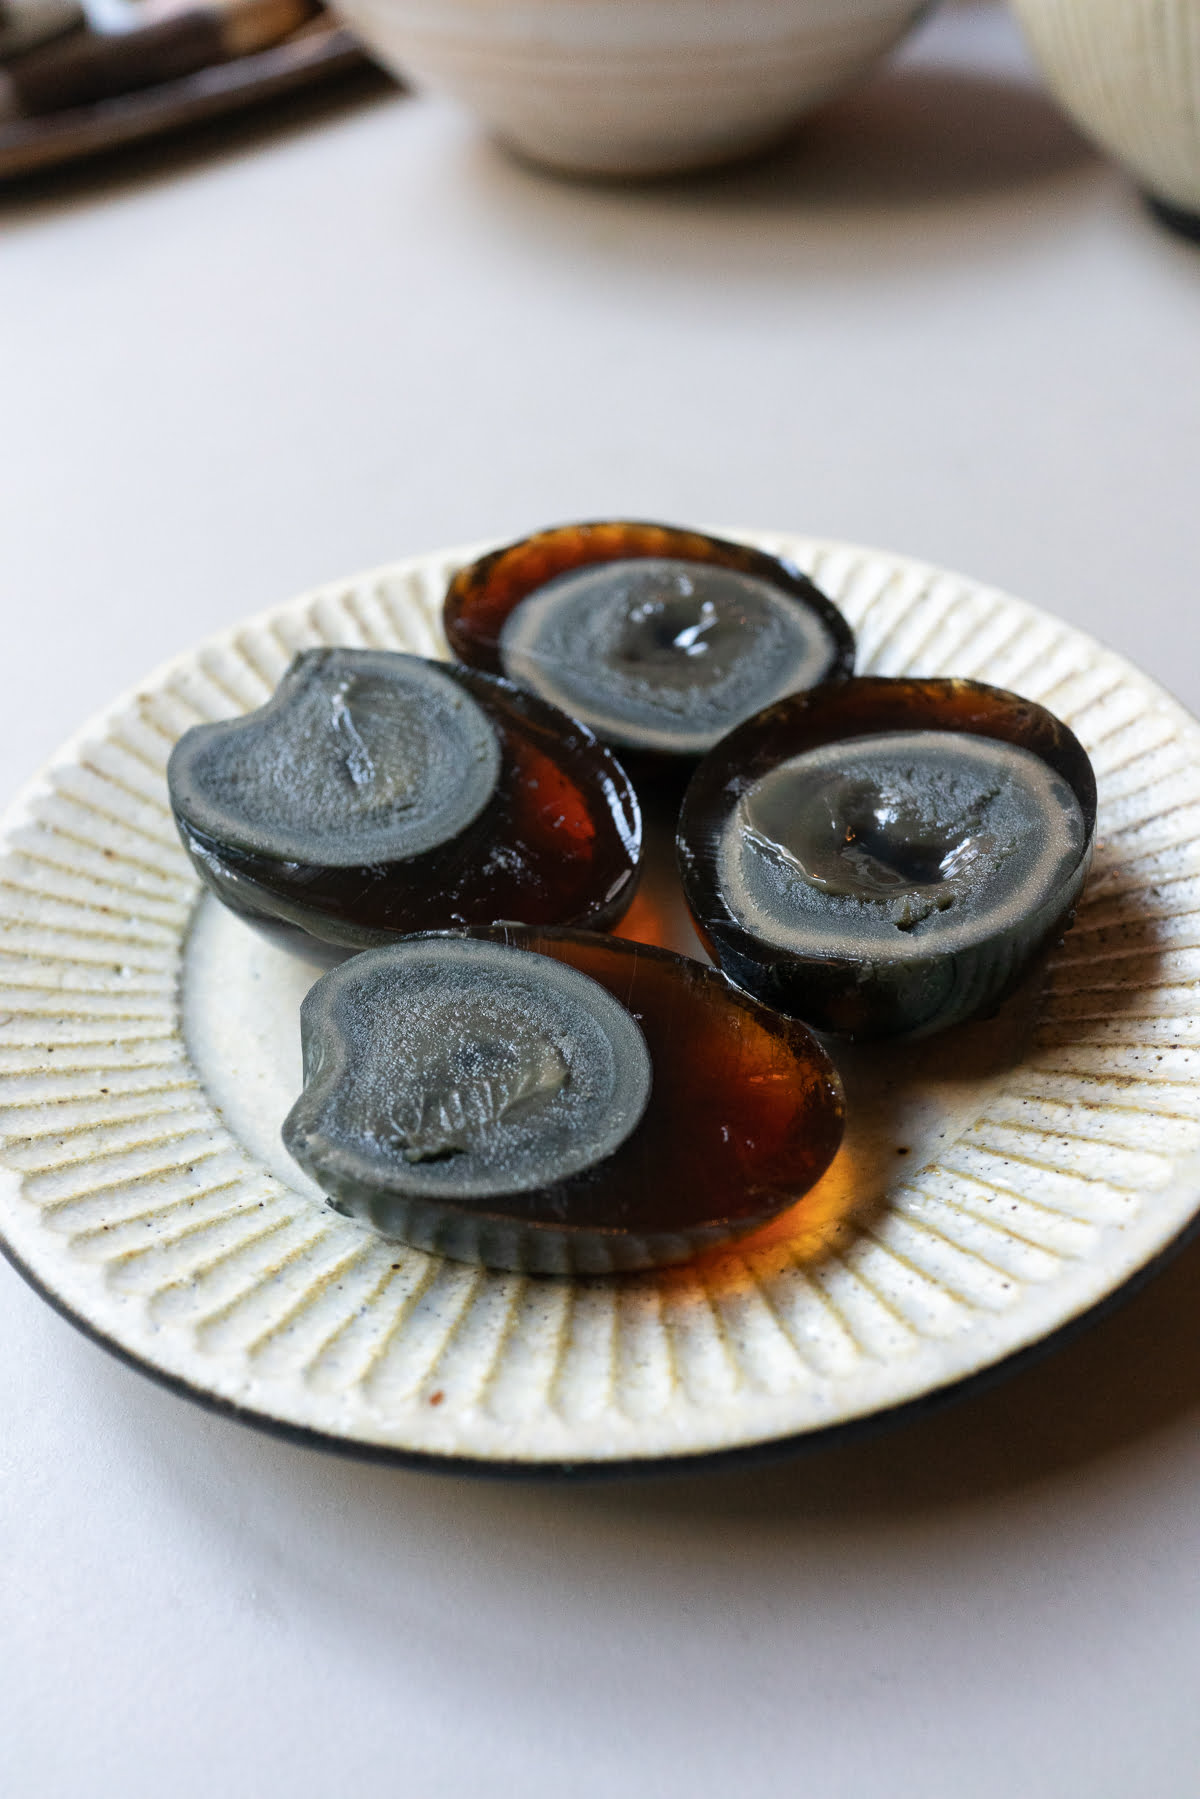 Two peeled and halved century eggs on a plate.